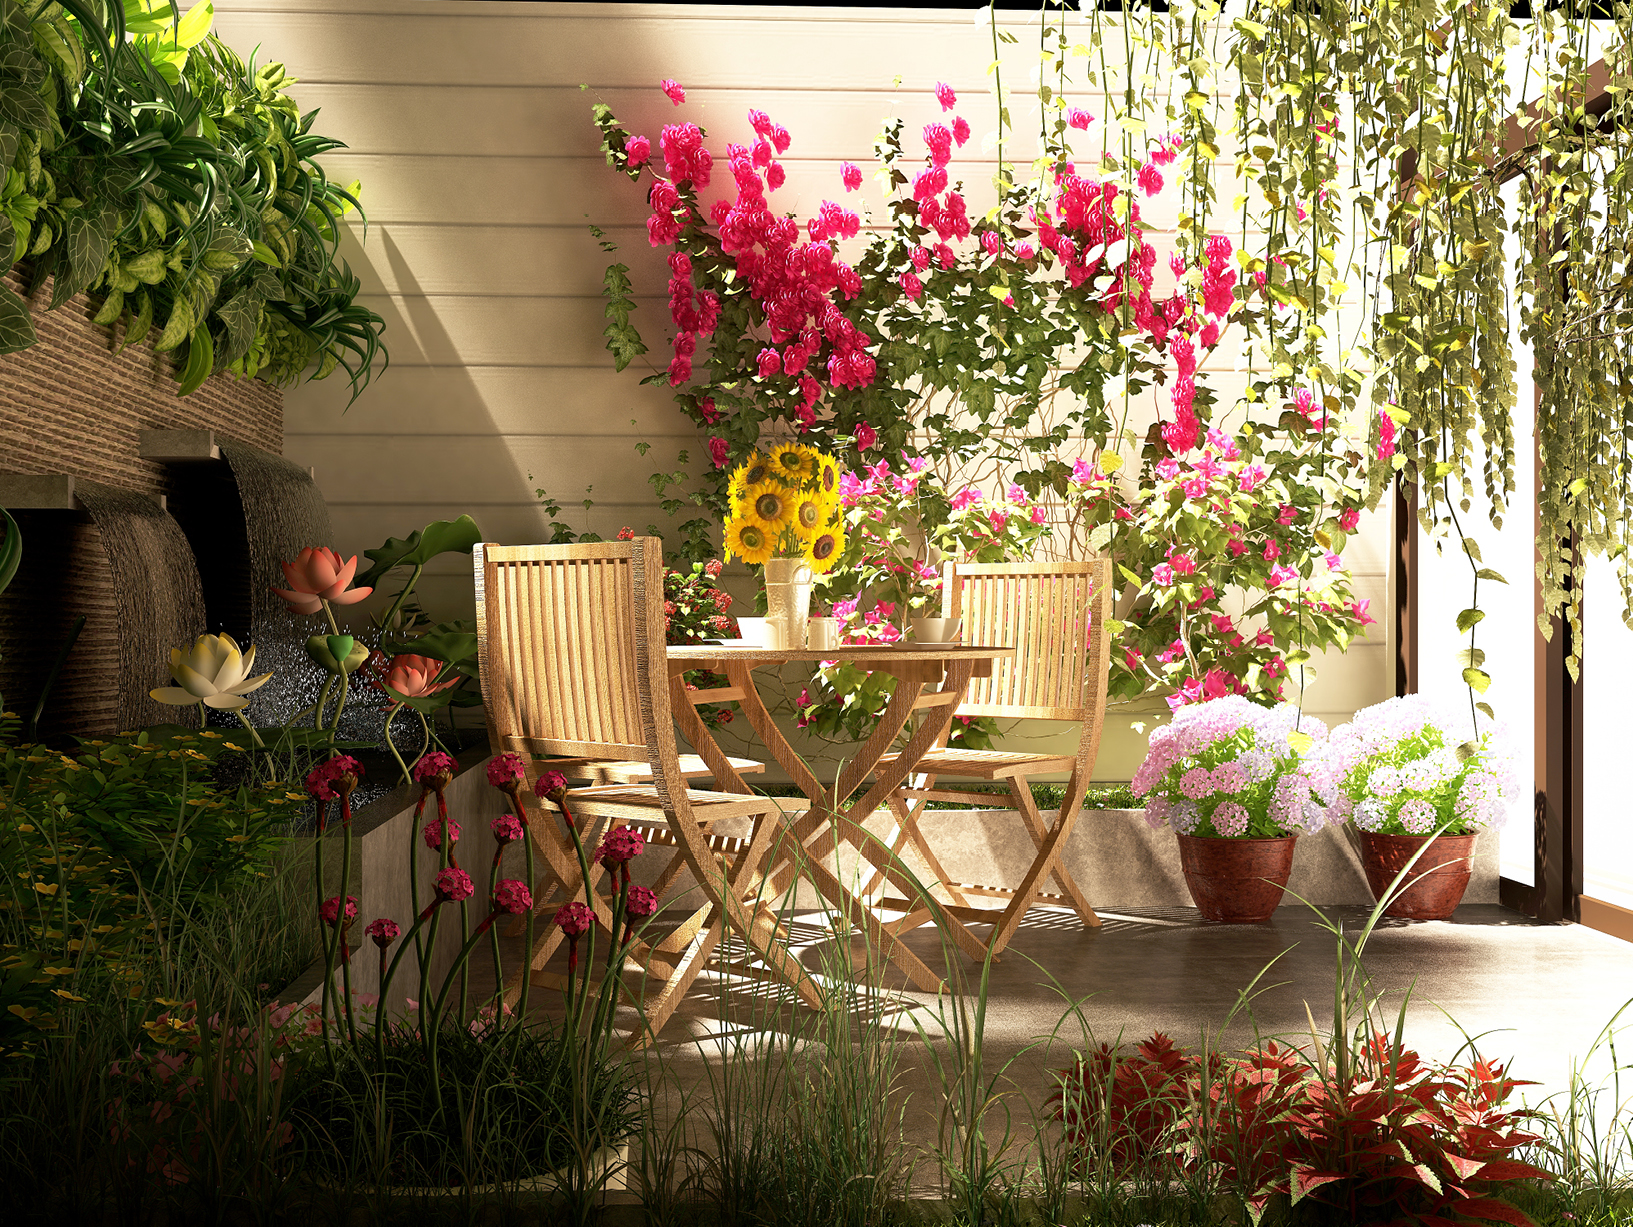 patio furniture and flowers